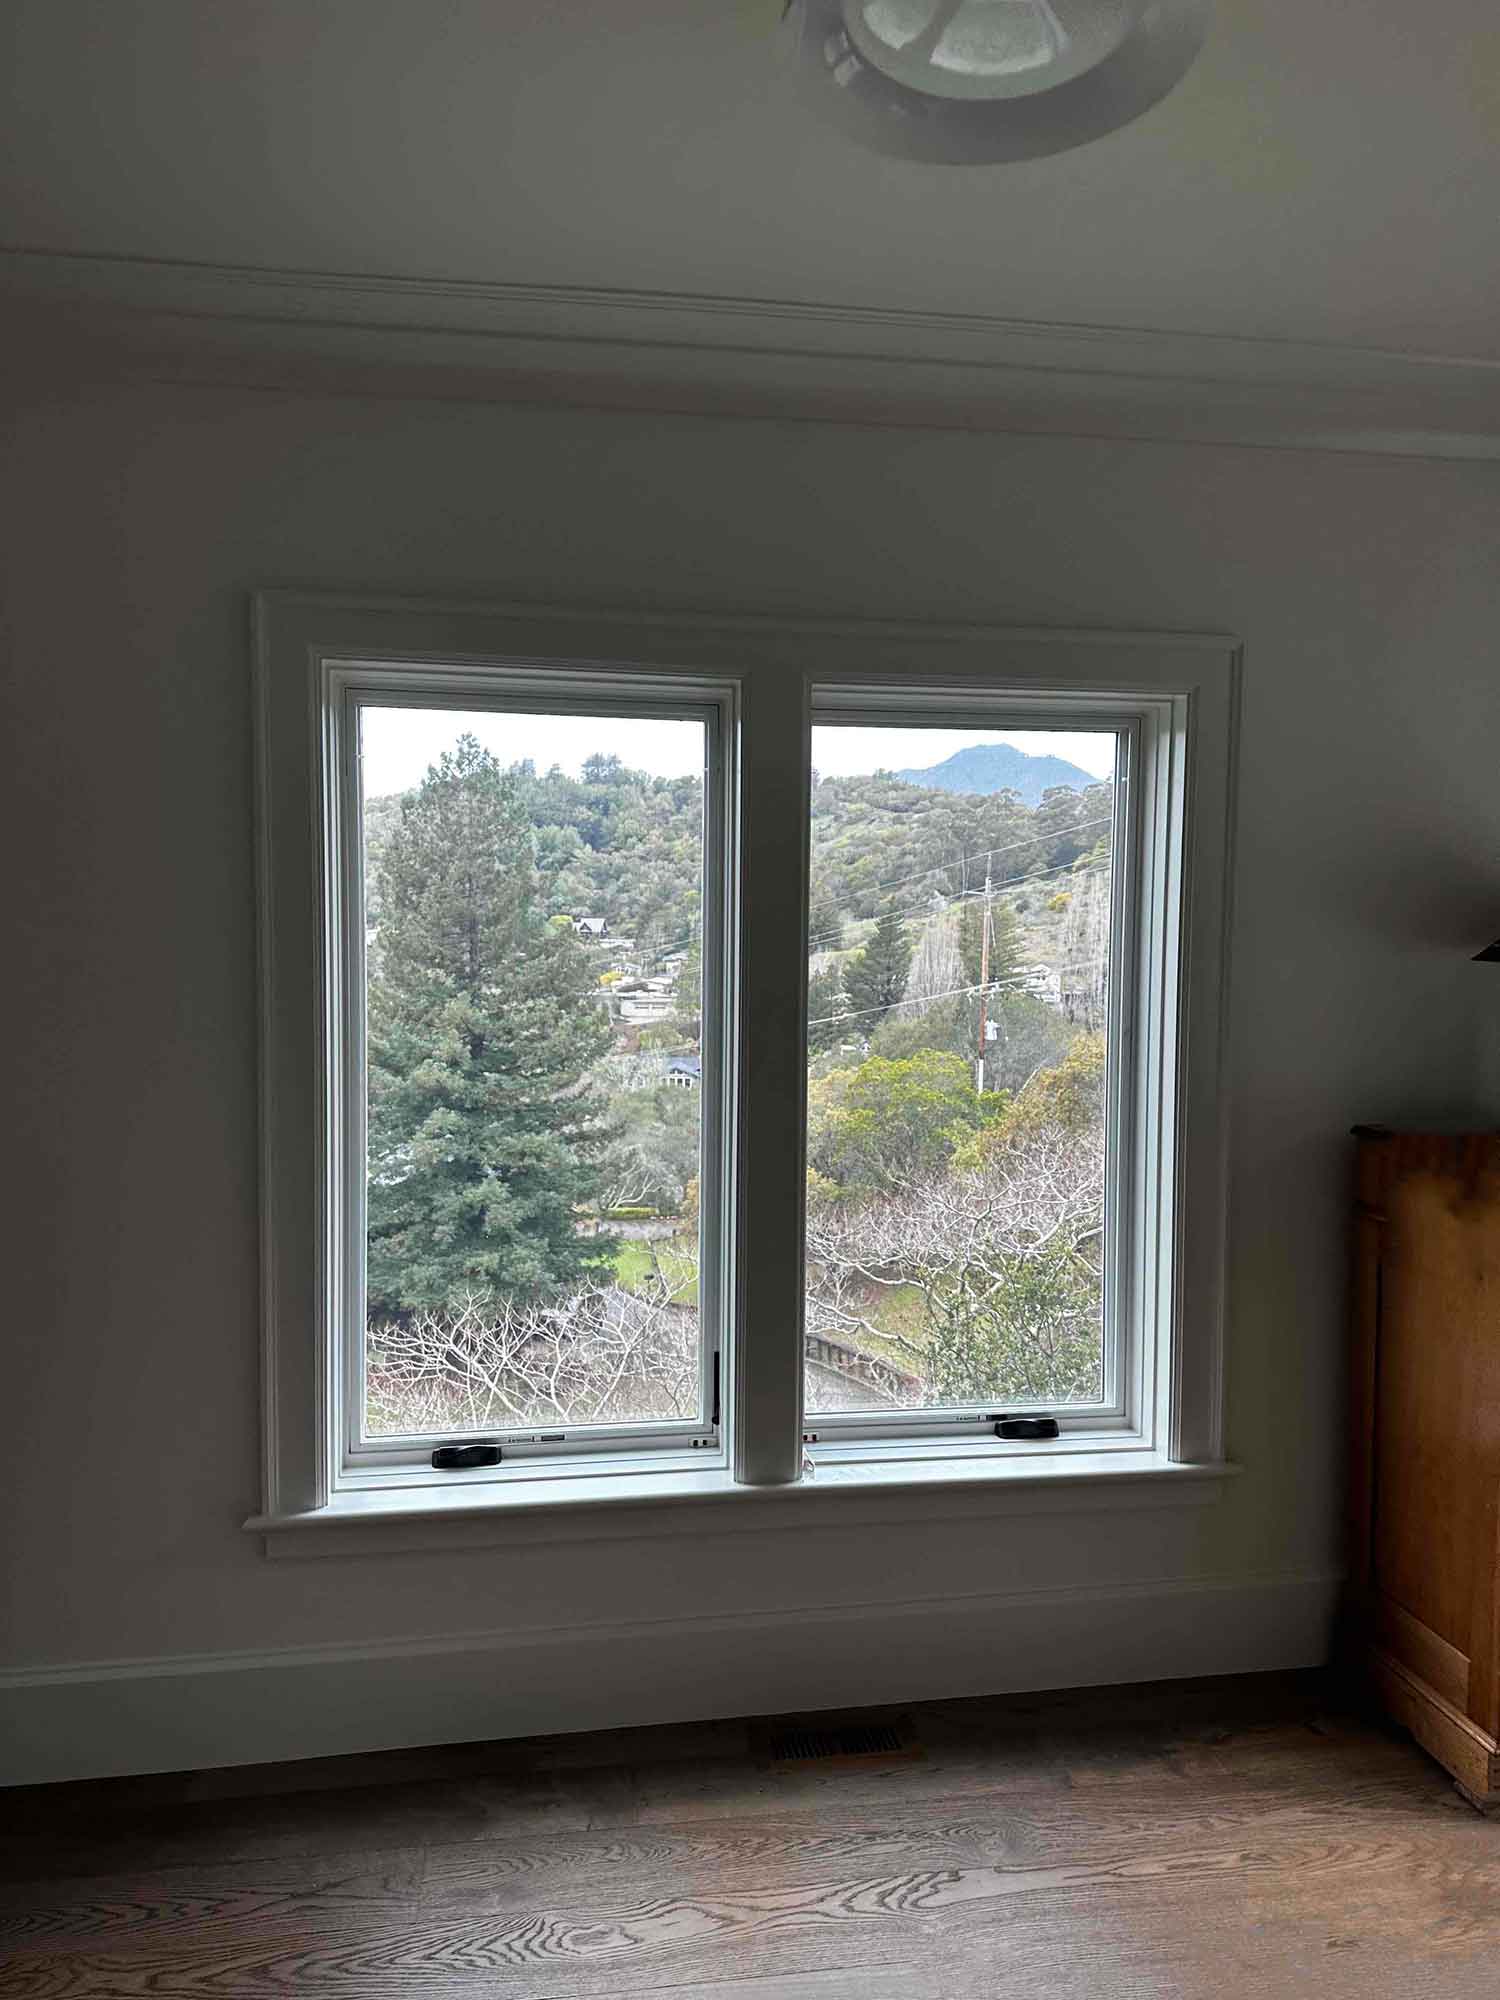 ClimatePro is your Mill Valley Home Window Film Expert. Get a free consultation today.